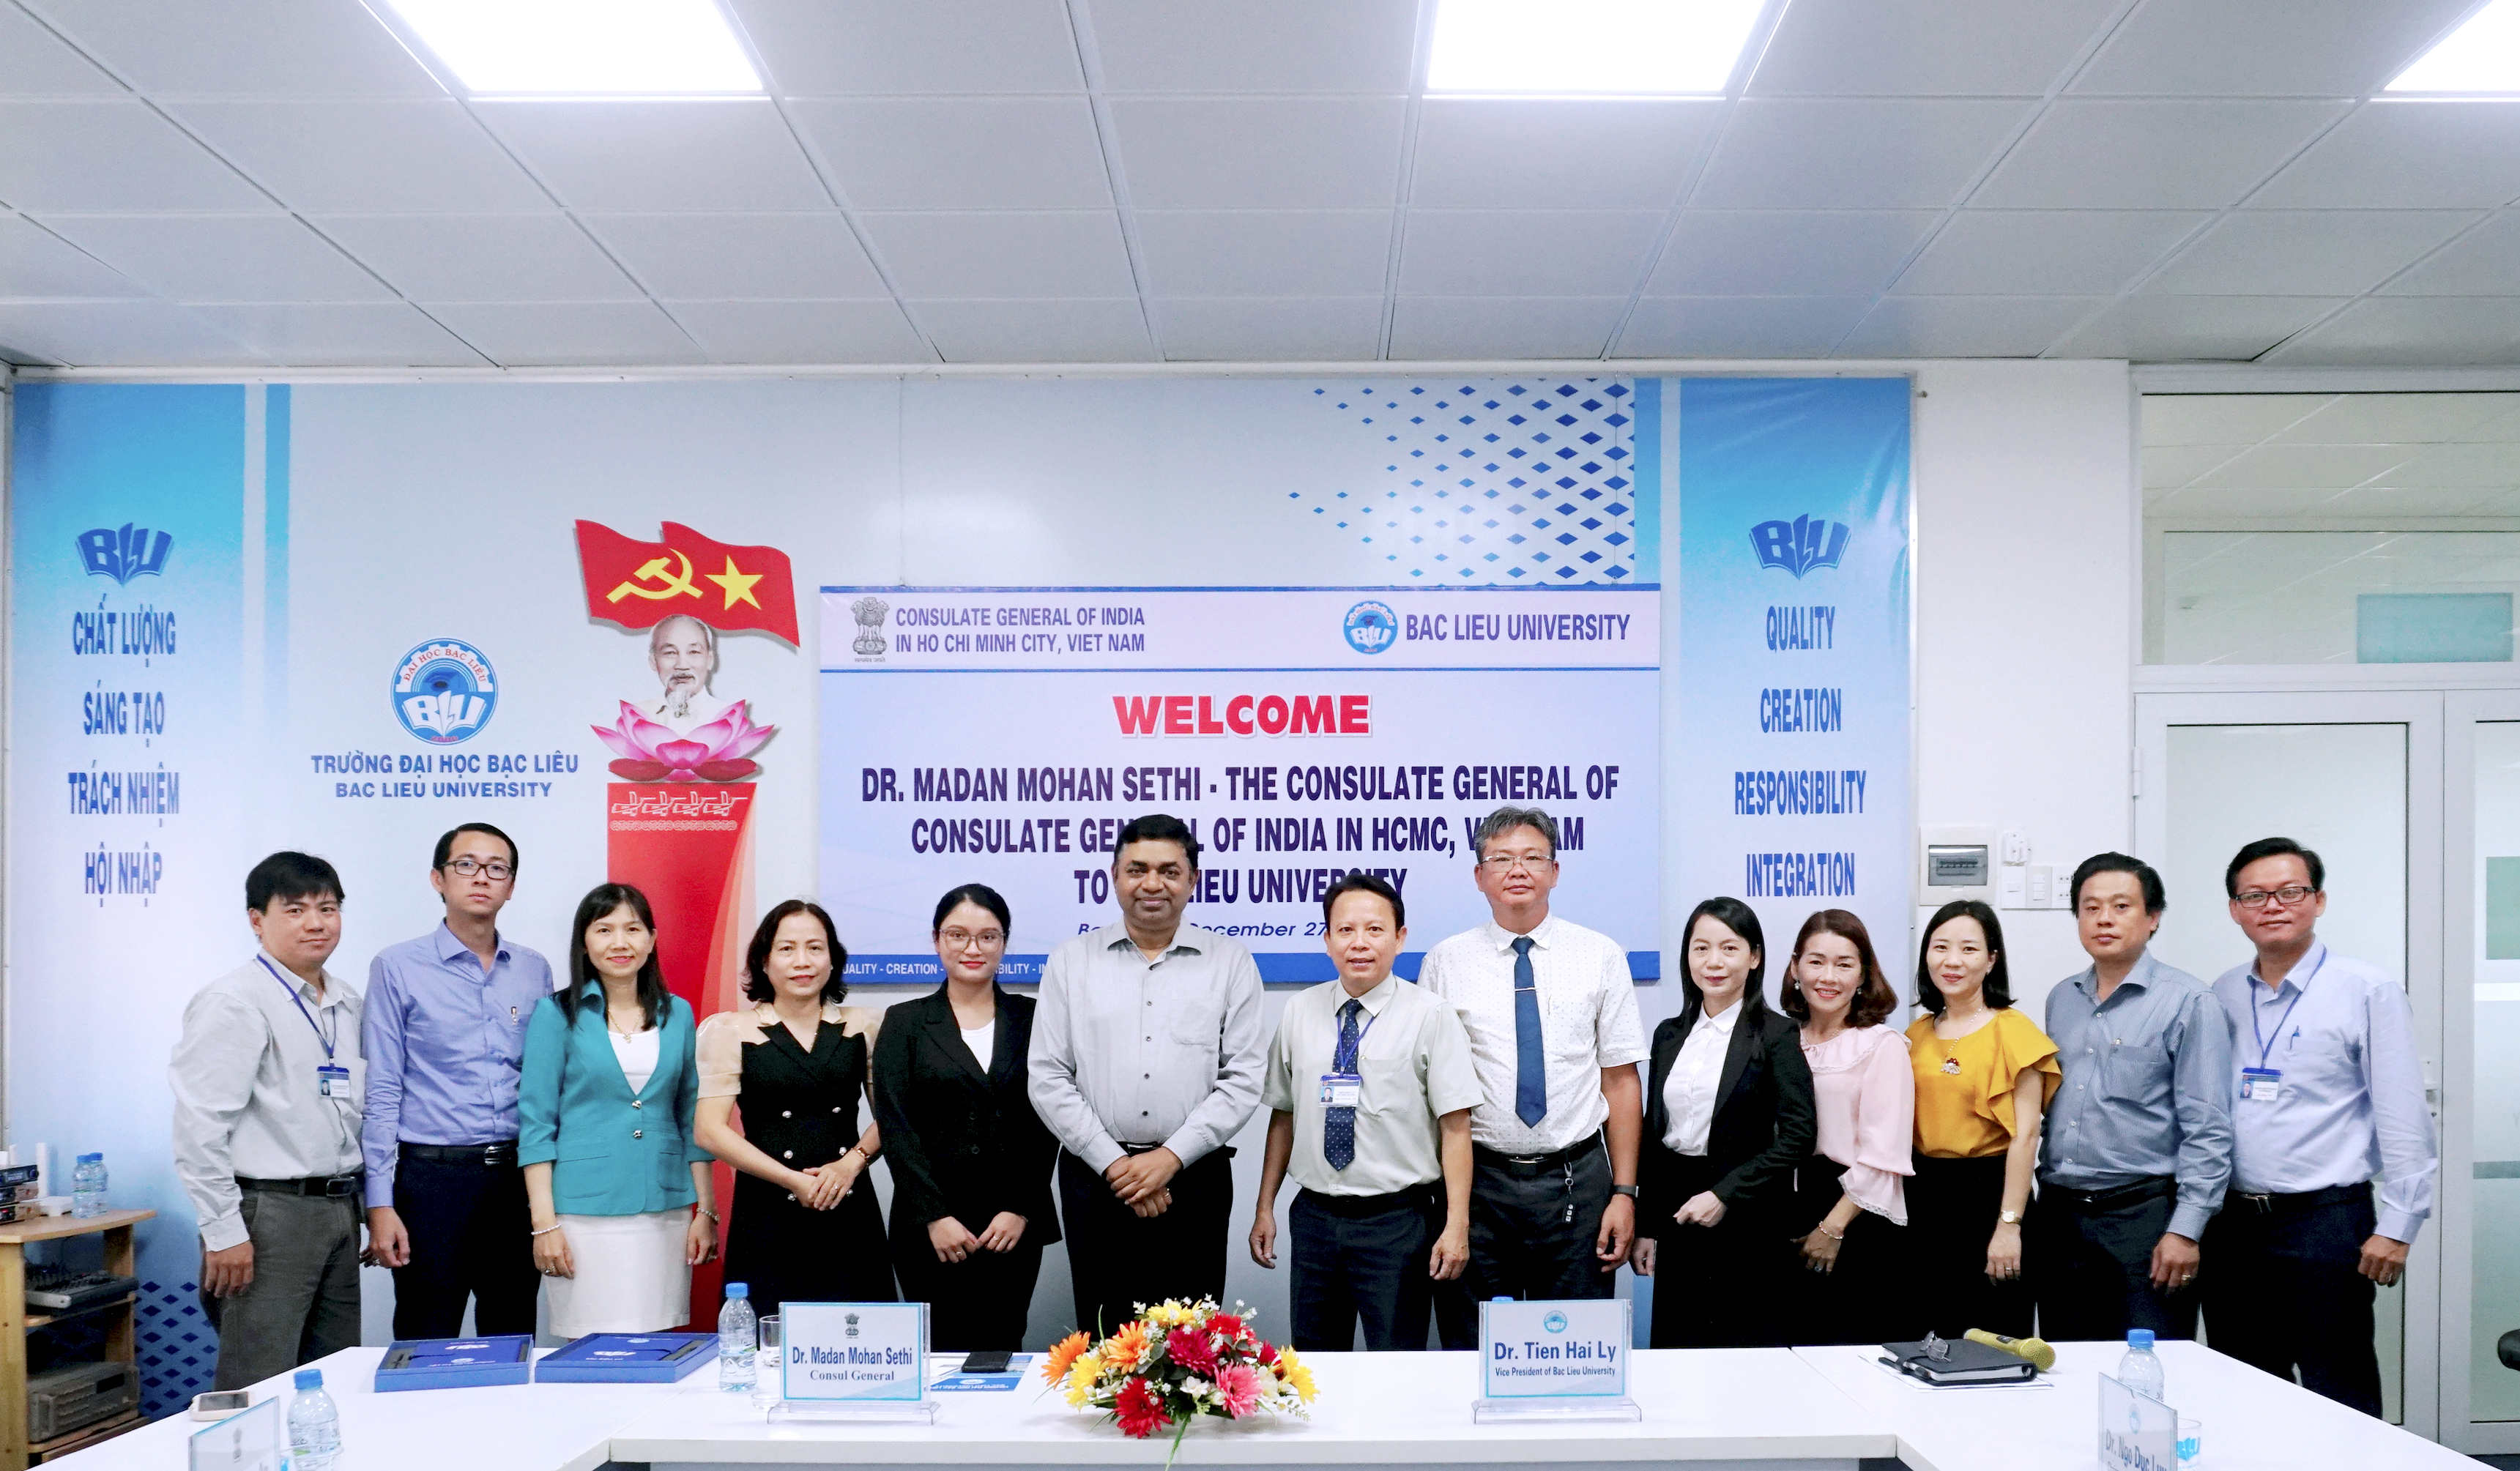 Bac Lieu University welcomed and worked with the Indian Consulate General in Ho Chi Minh City